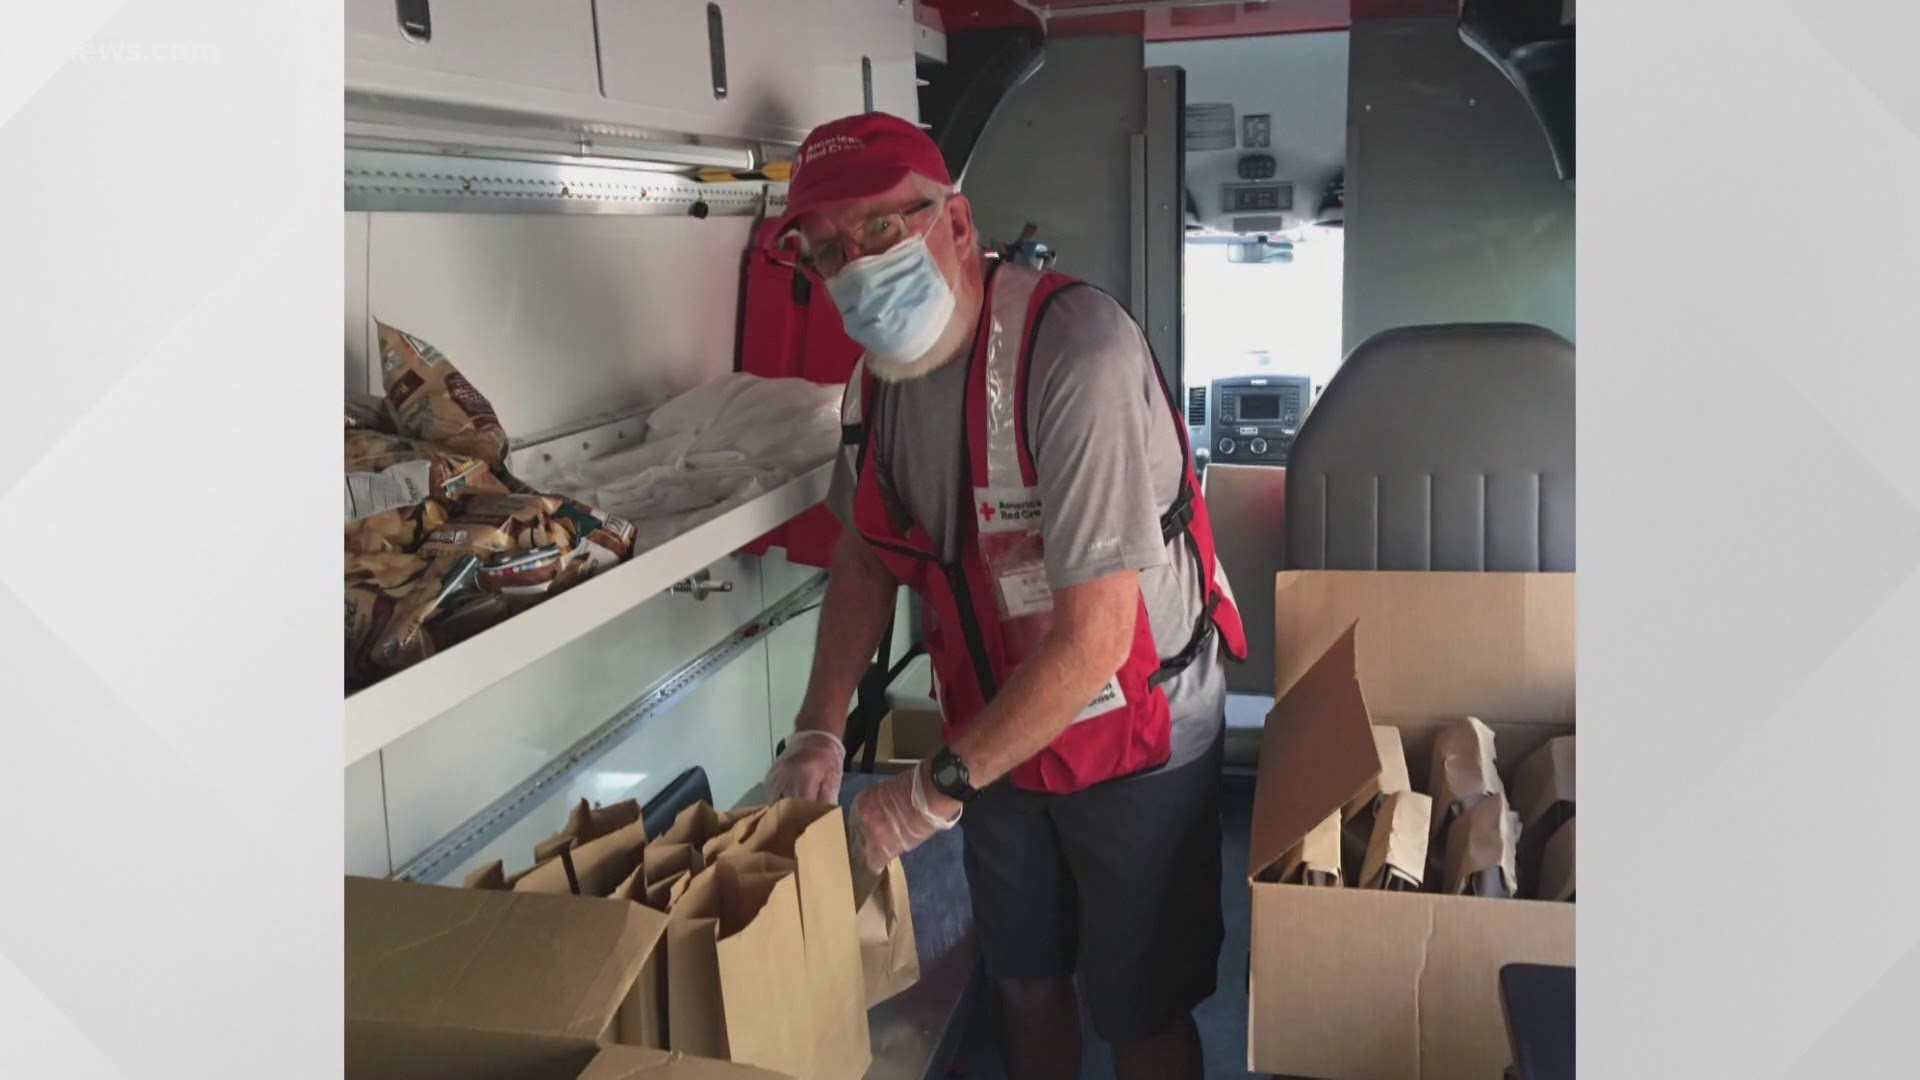 The nonprofit organization helped with tens of thousands of meals and hotel rooms for those displaced during the wildfire season.